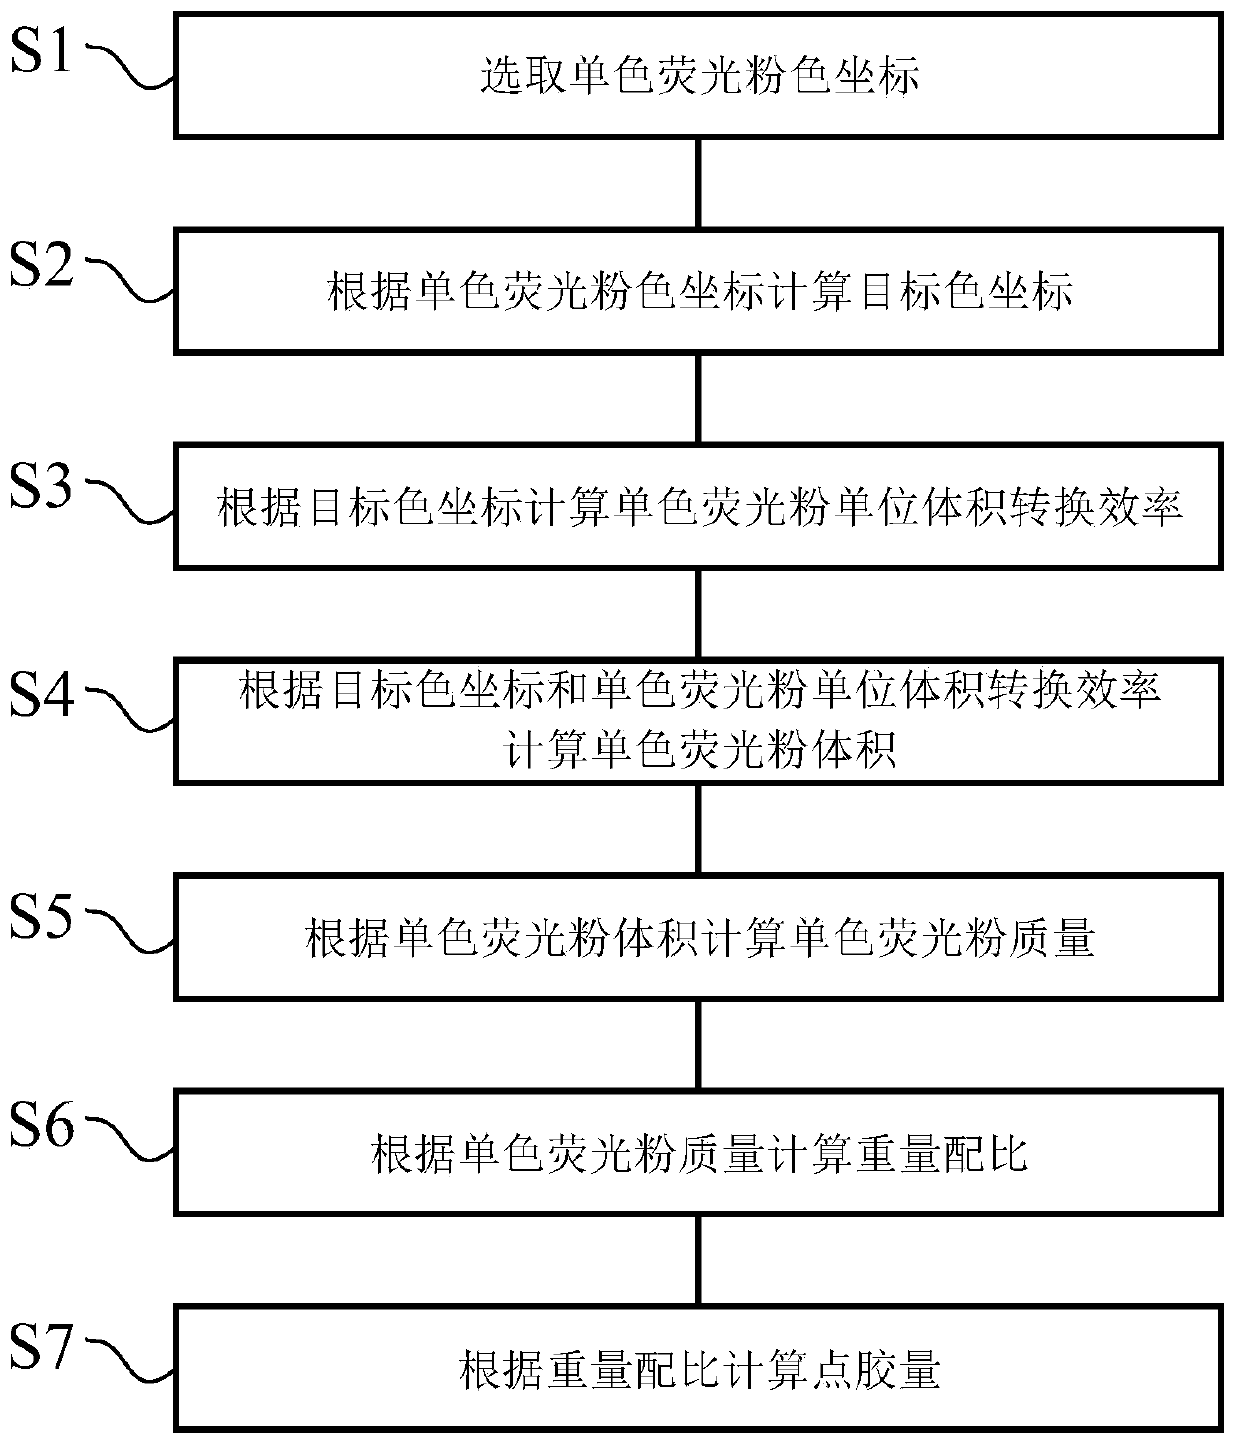 Method for recommending monochromatic fluorescent powder LED ratio and dispensing amount based on least square method